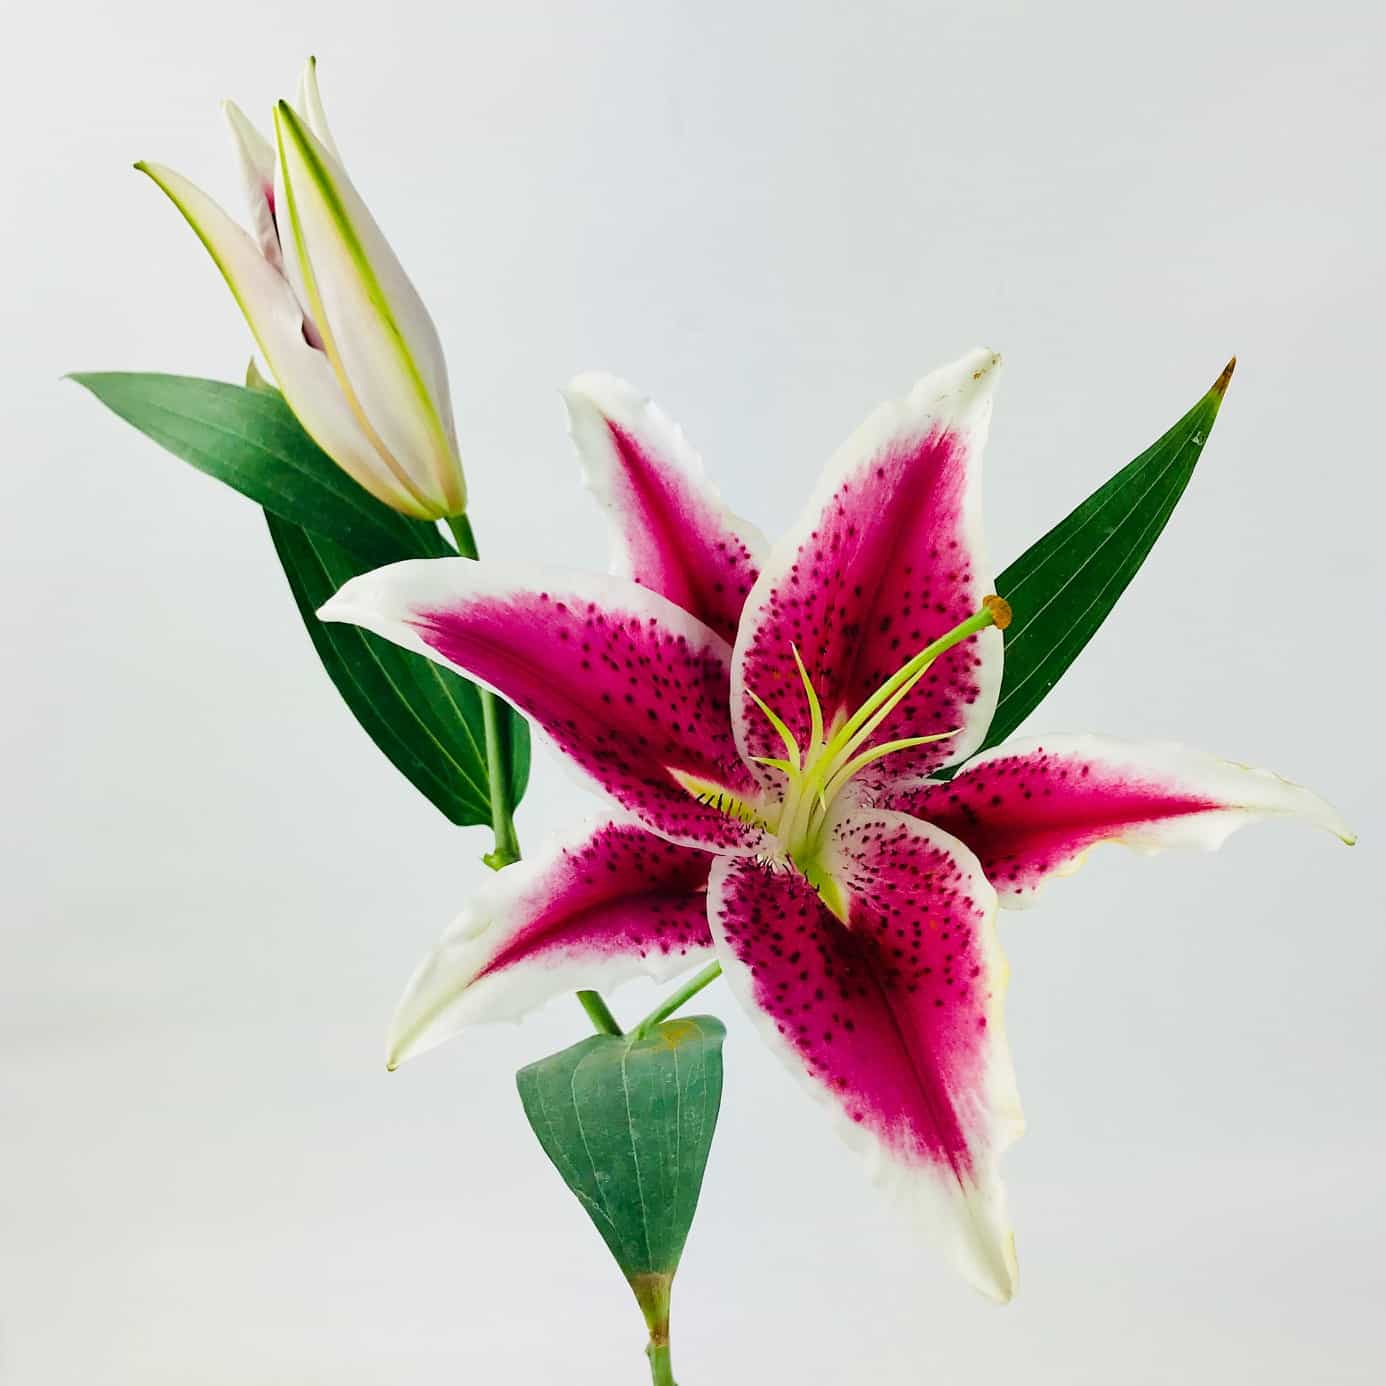 Know Why Lily Flowers are So Special | Speciality of Lily Flowers  [site:name]